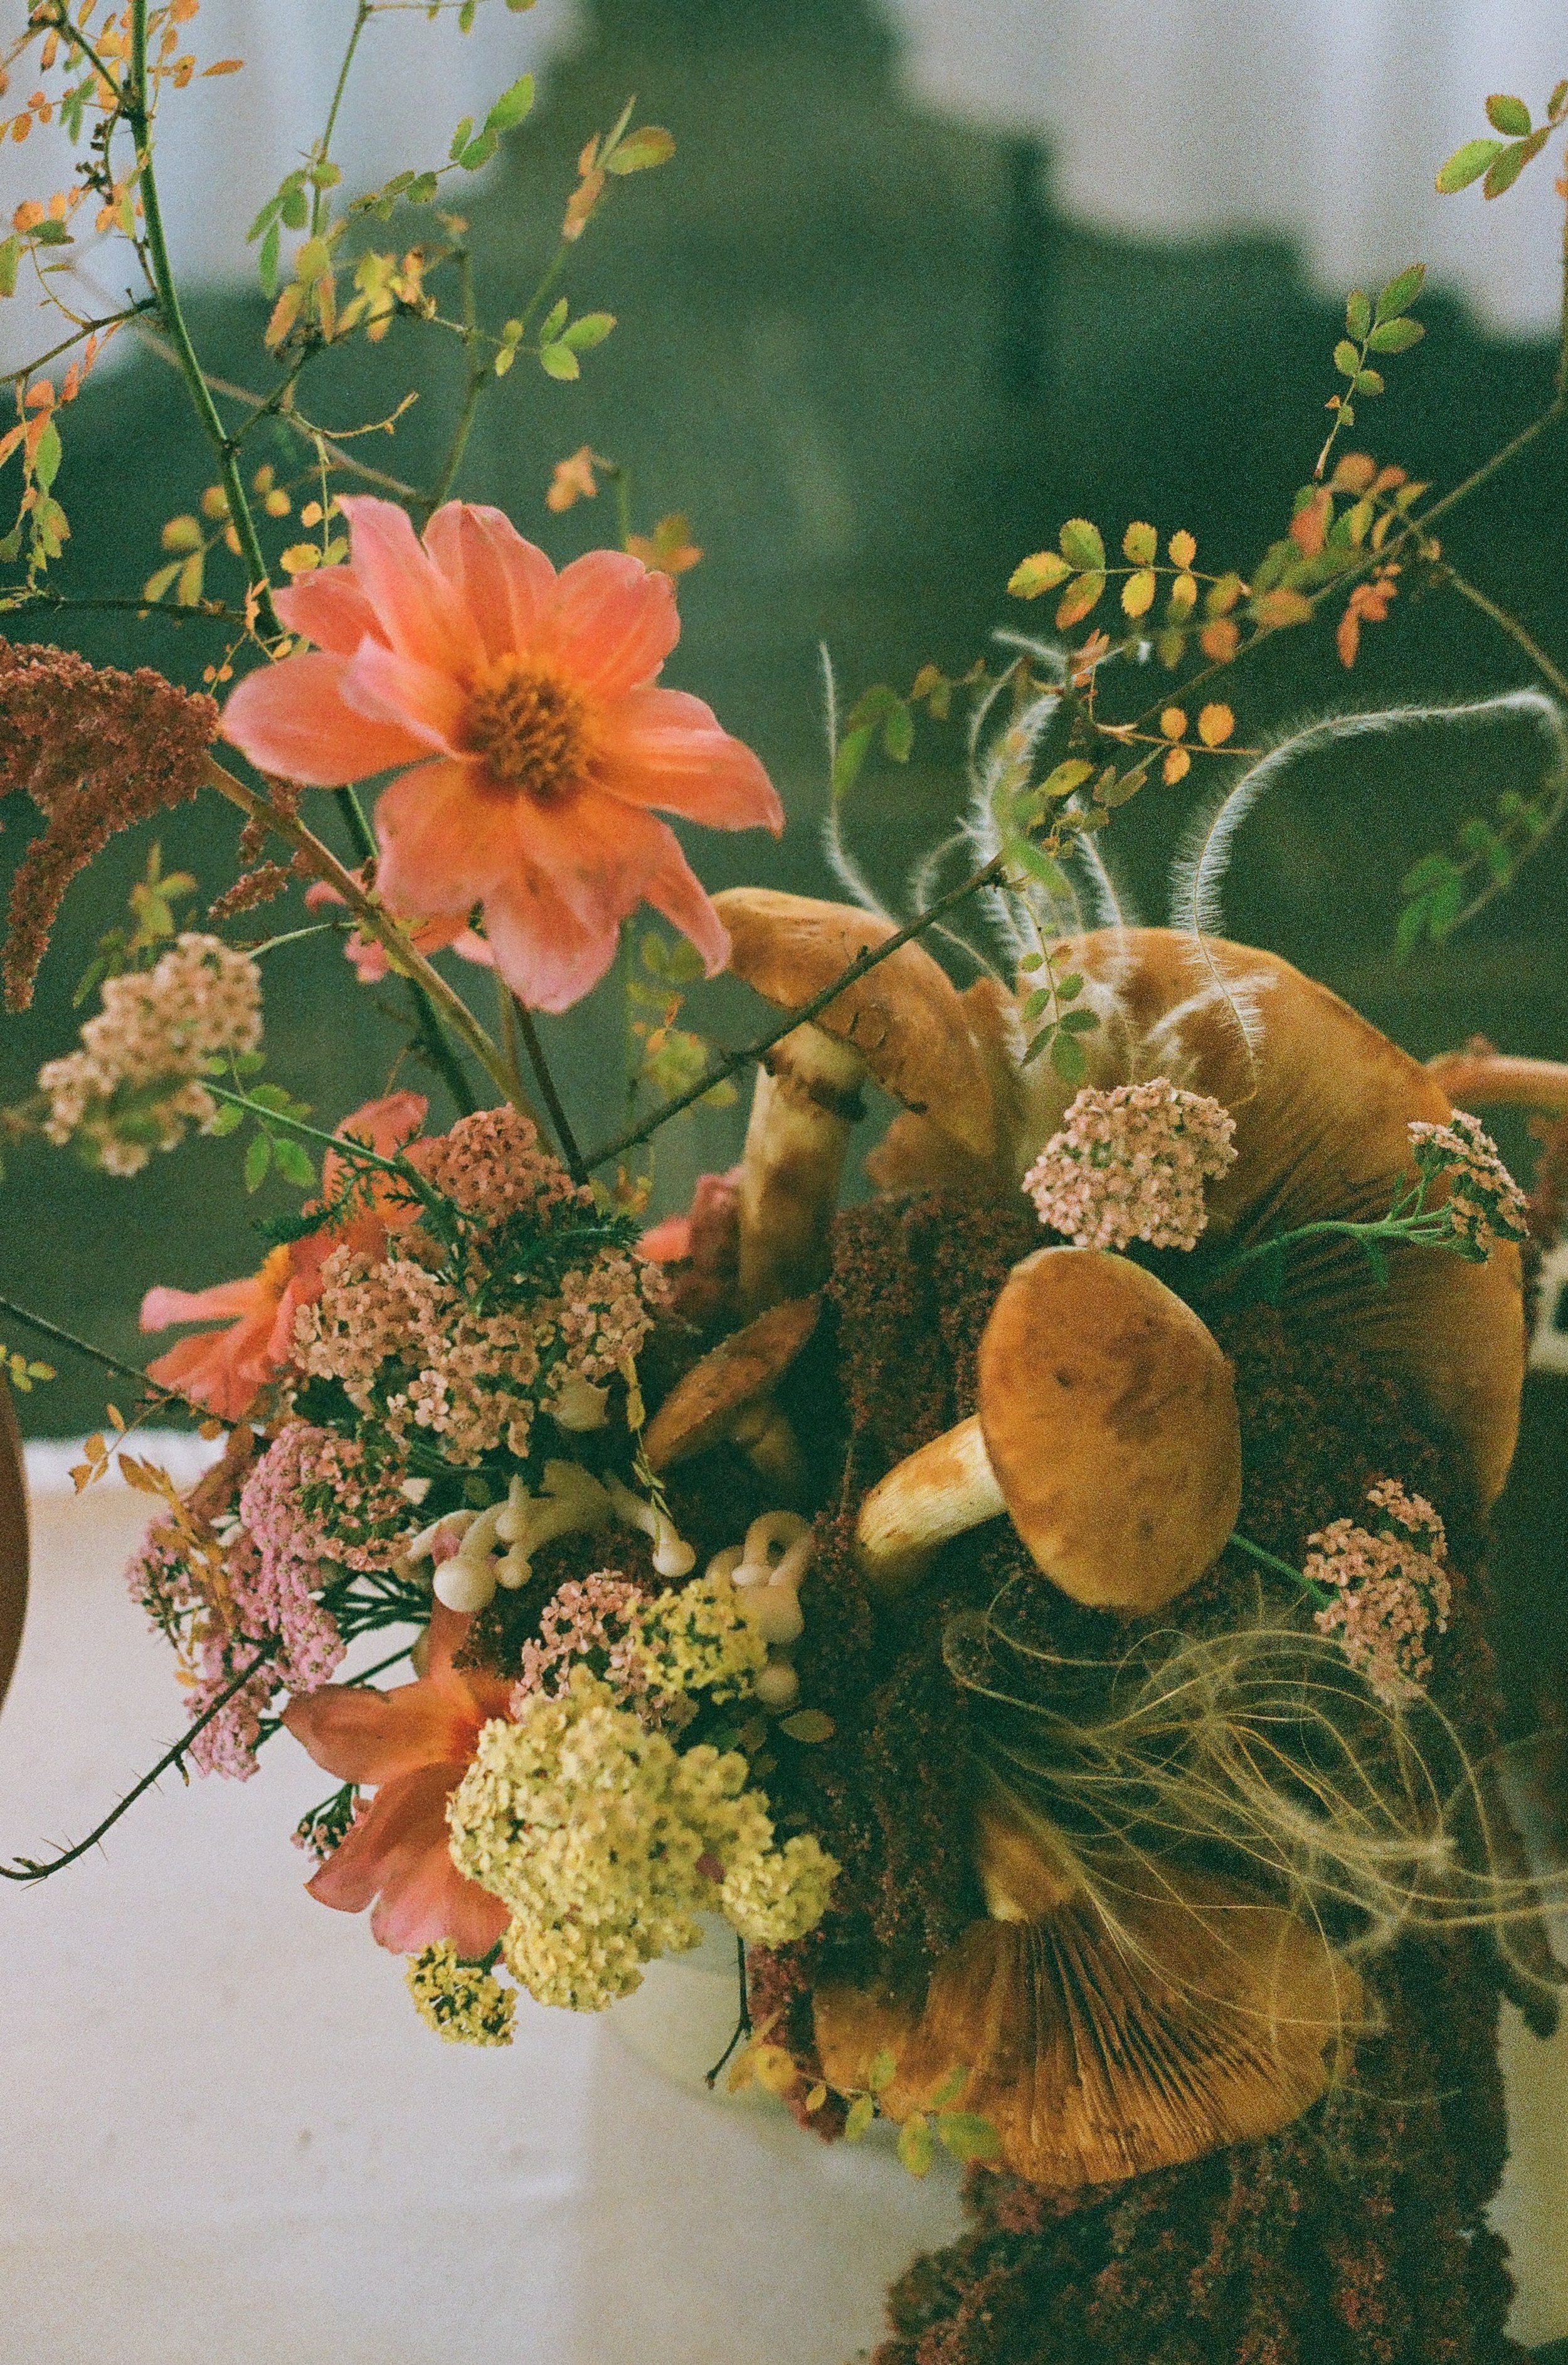 keep floral_vancouver island florist_farm to table flowers_ethical florals_discover our services_gallery 05.JPG